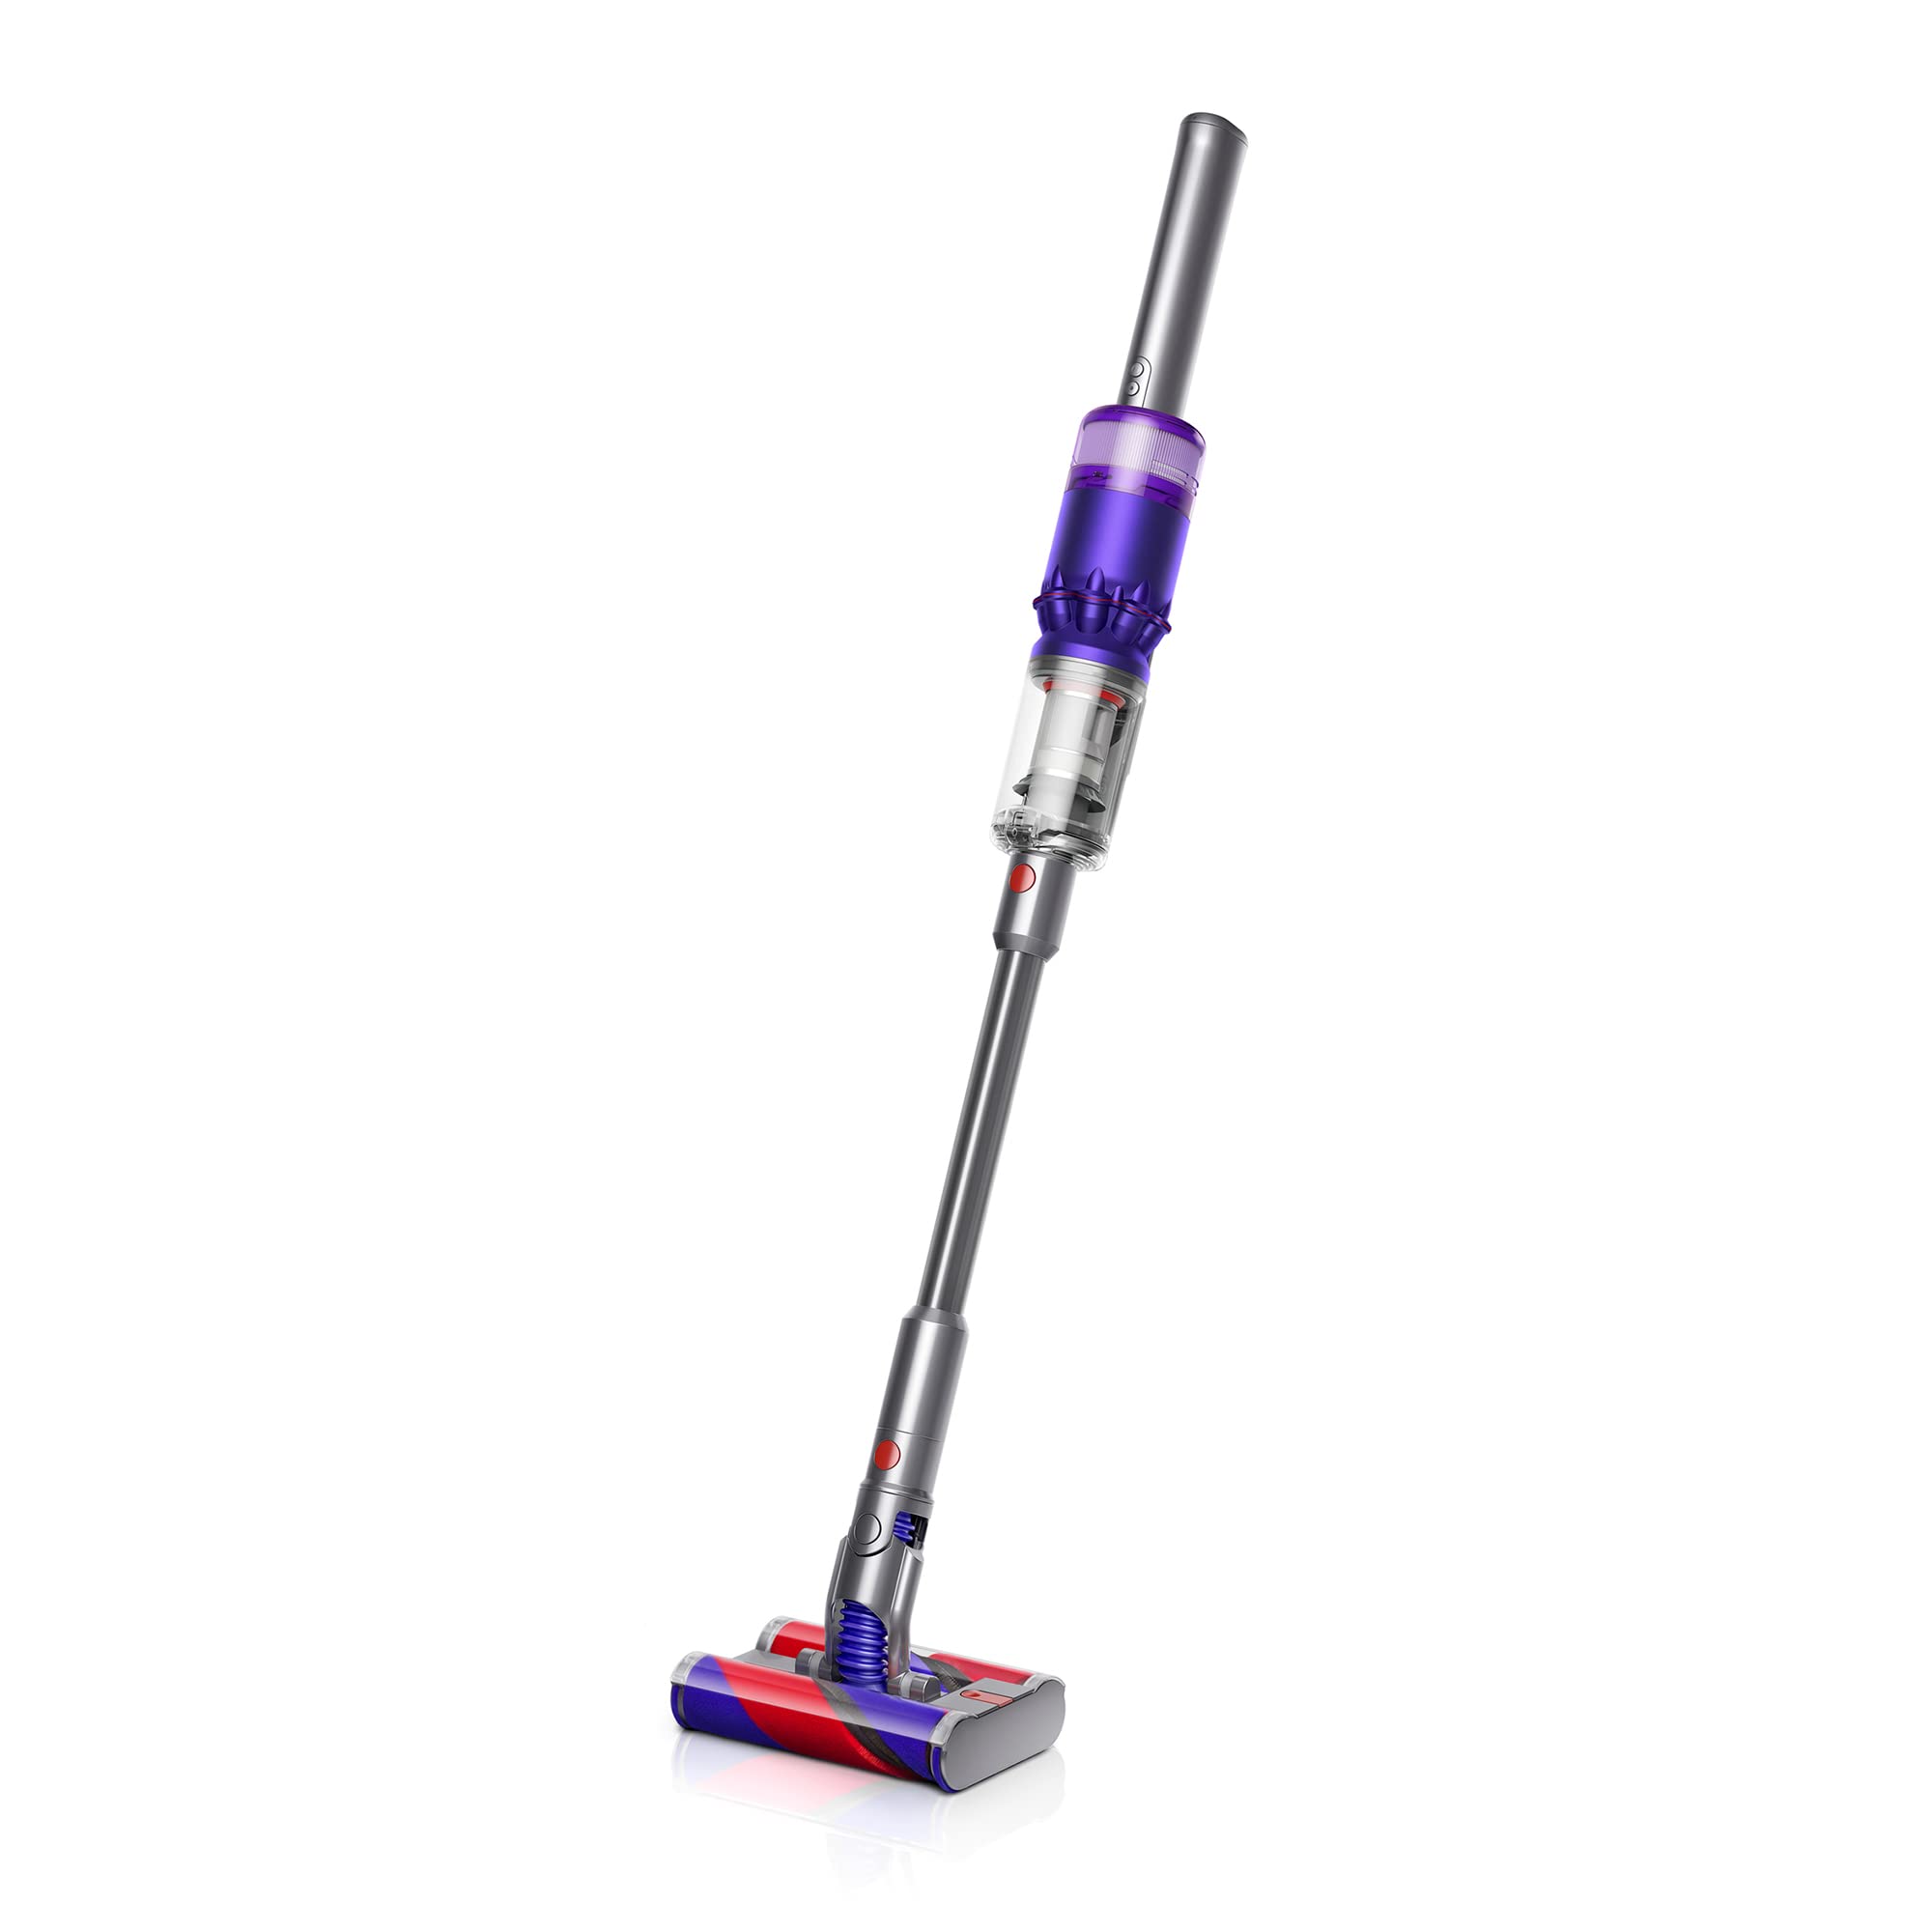 Dyson Omni-glide Cordless Vacuum Cleaner, List Price is $349.99, Now Only $199, You Save $150.99